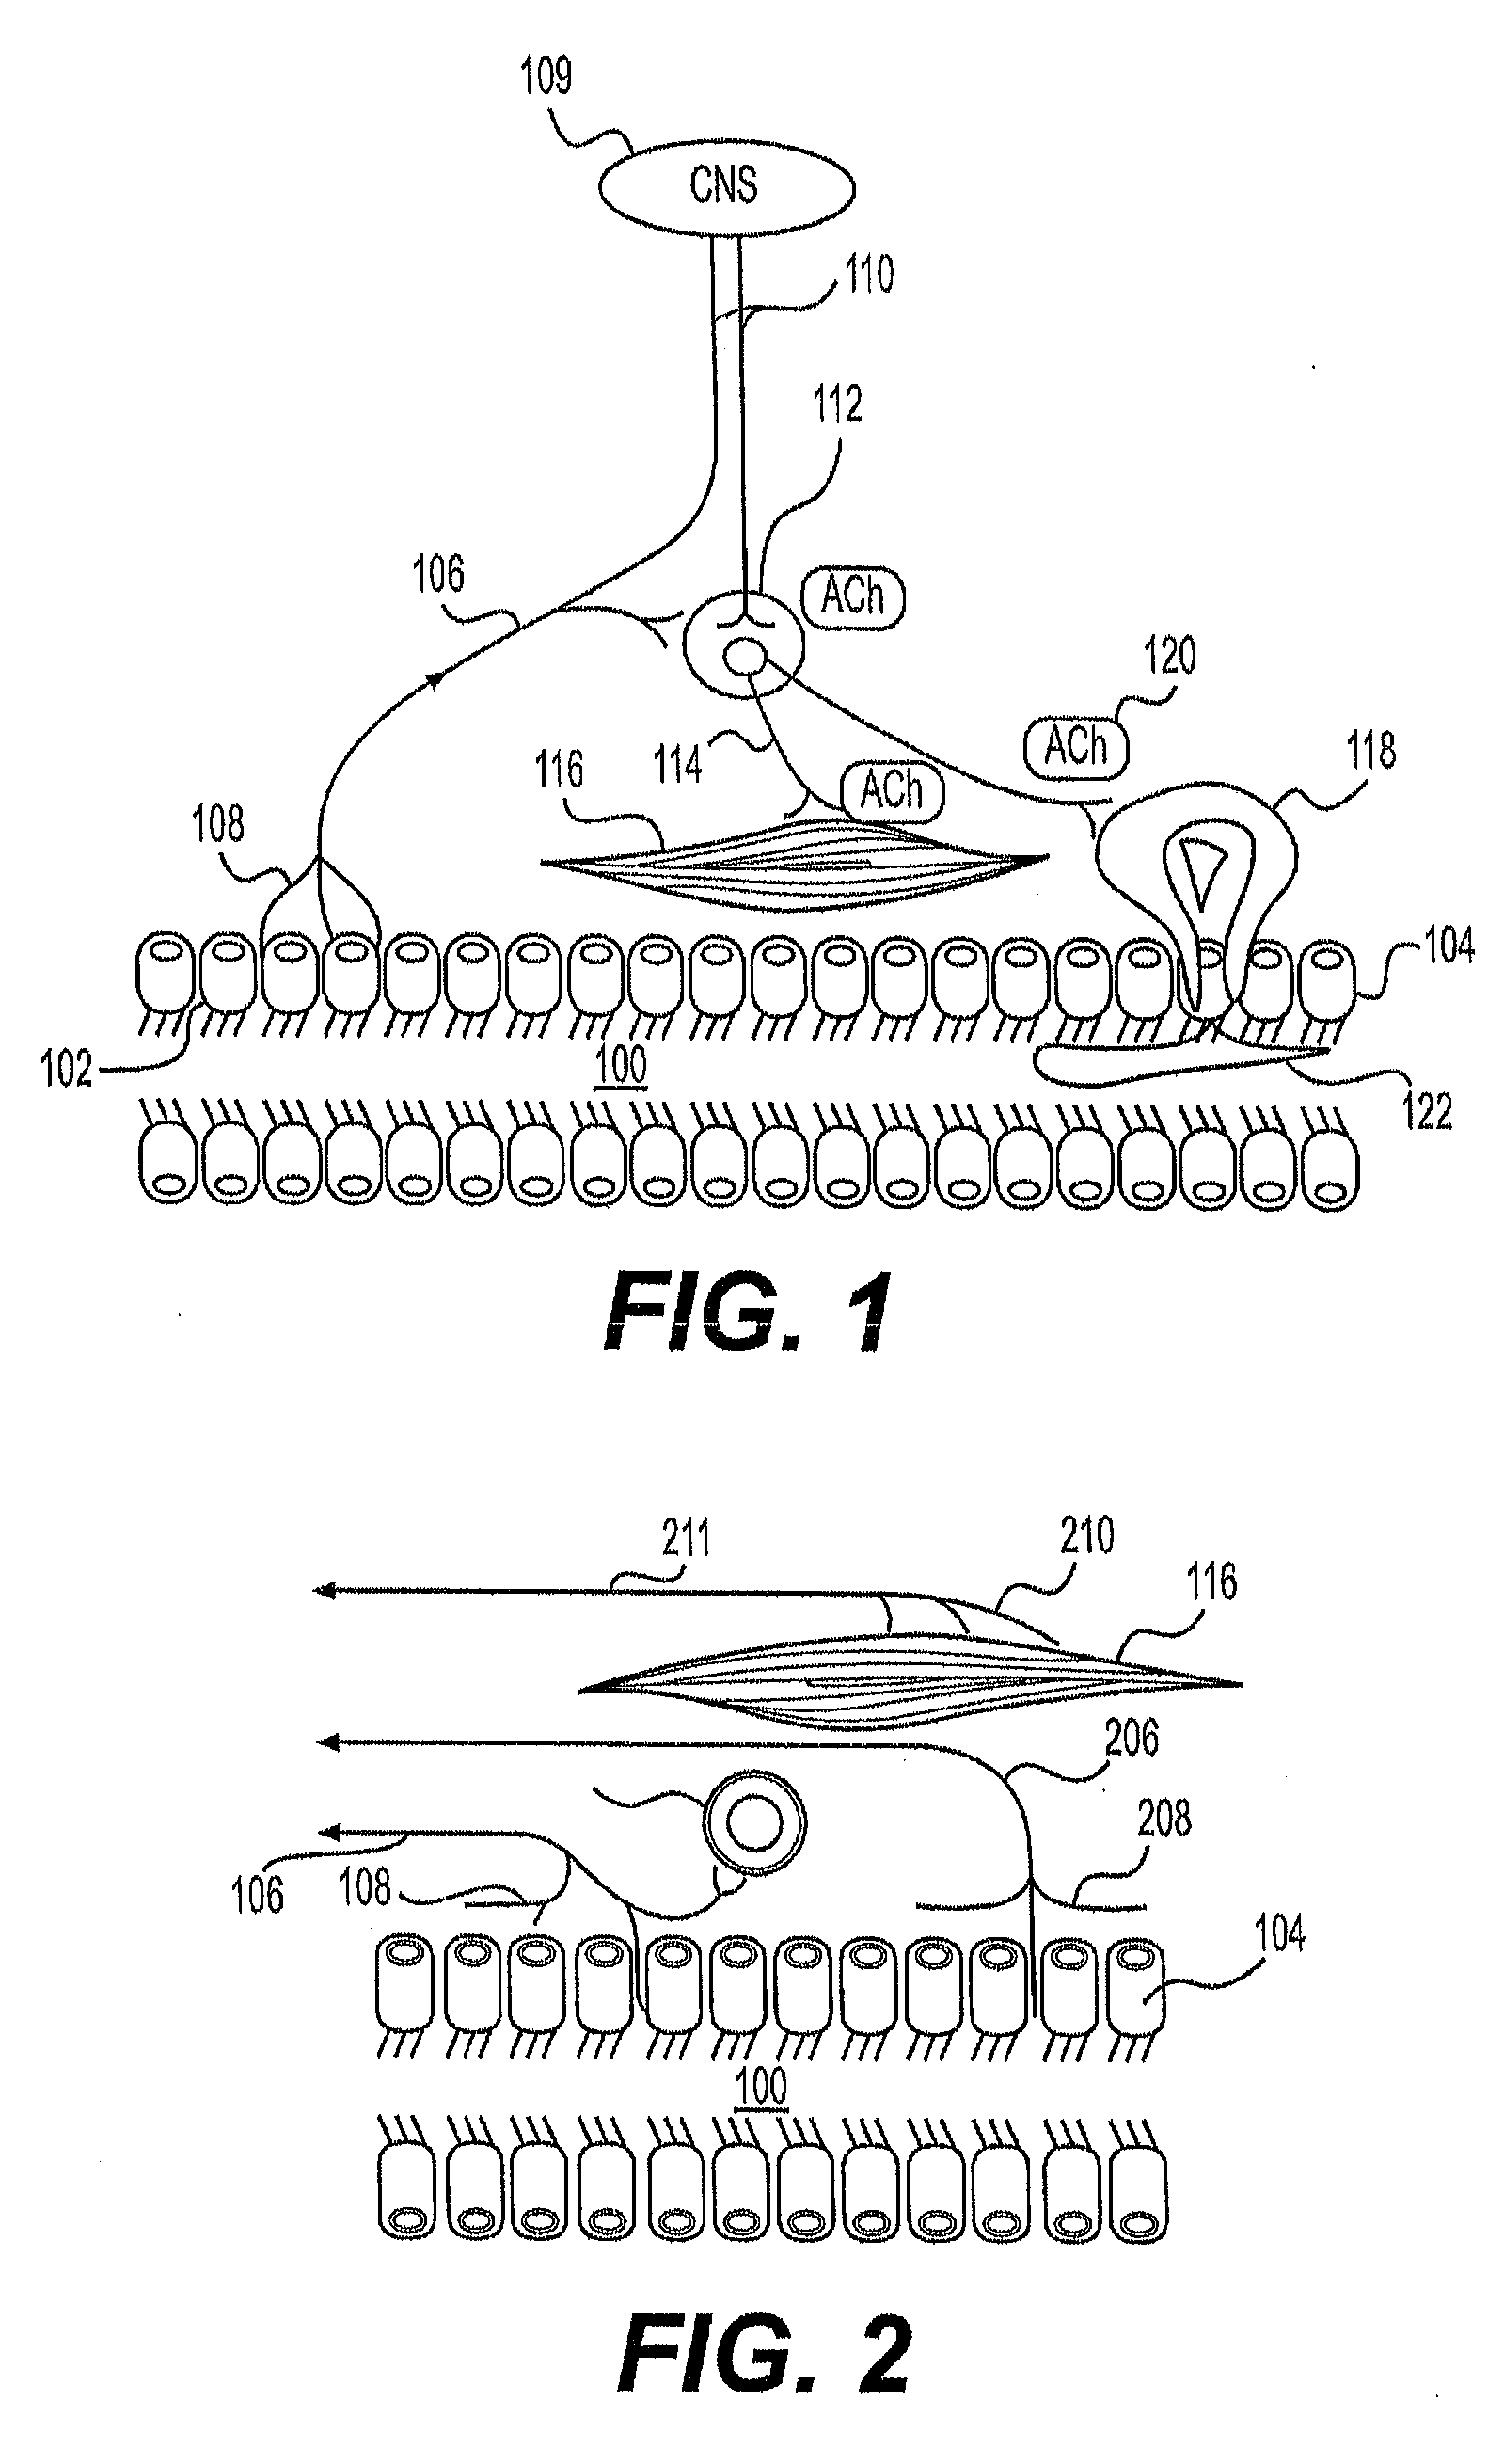 Airway diagnosis and treatment devices and related methods of use